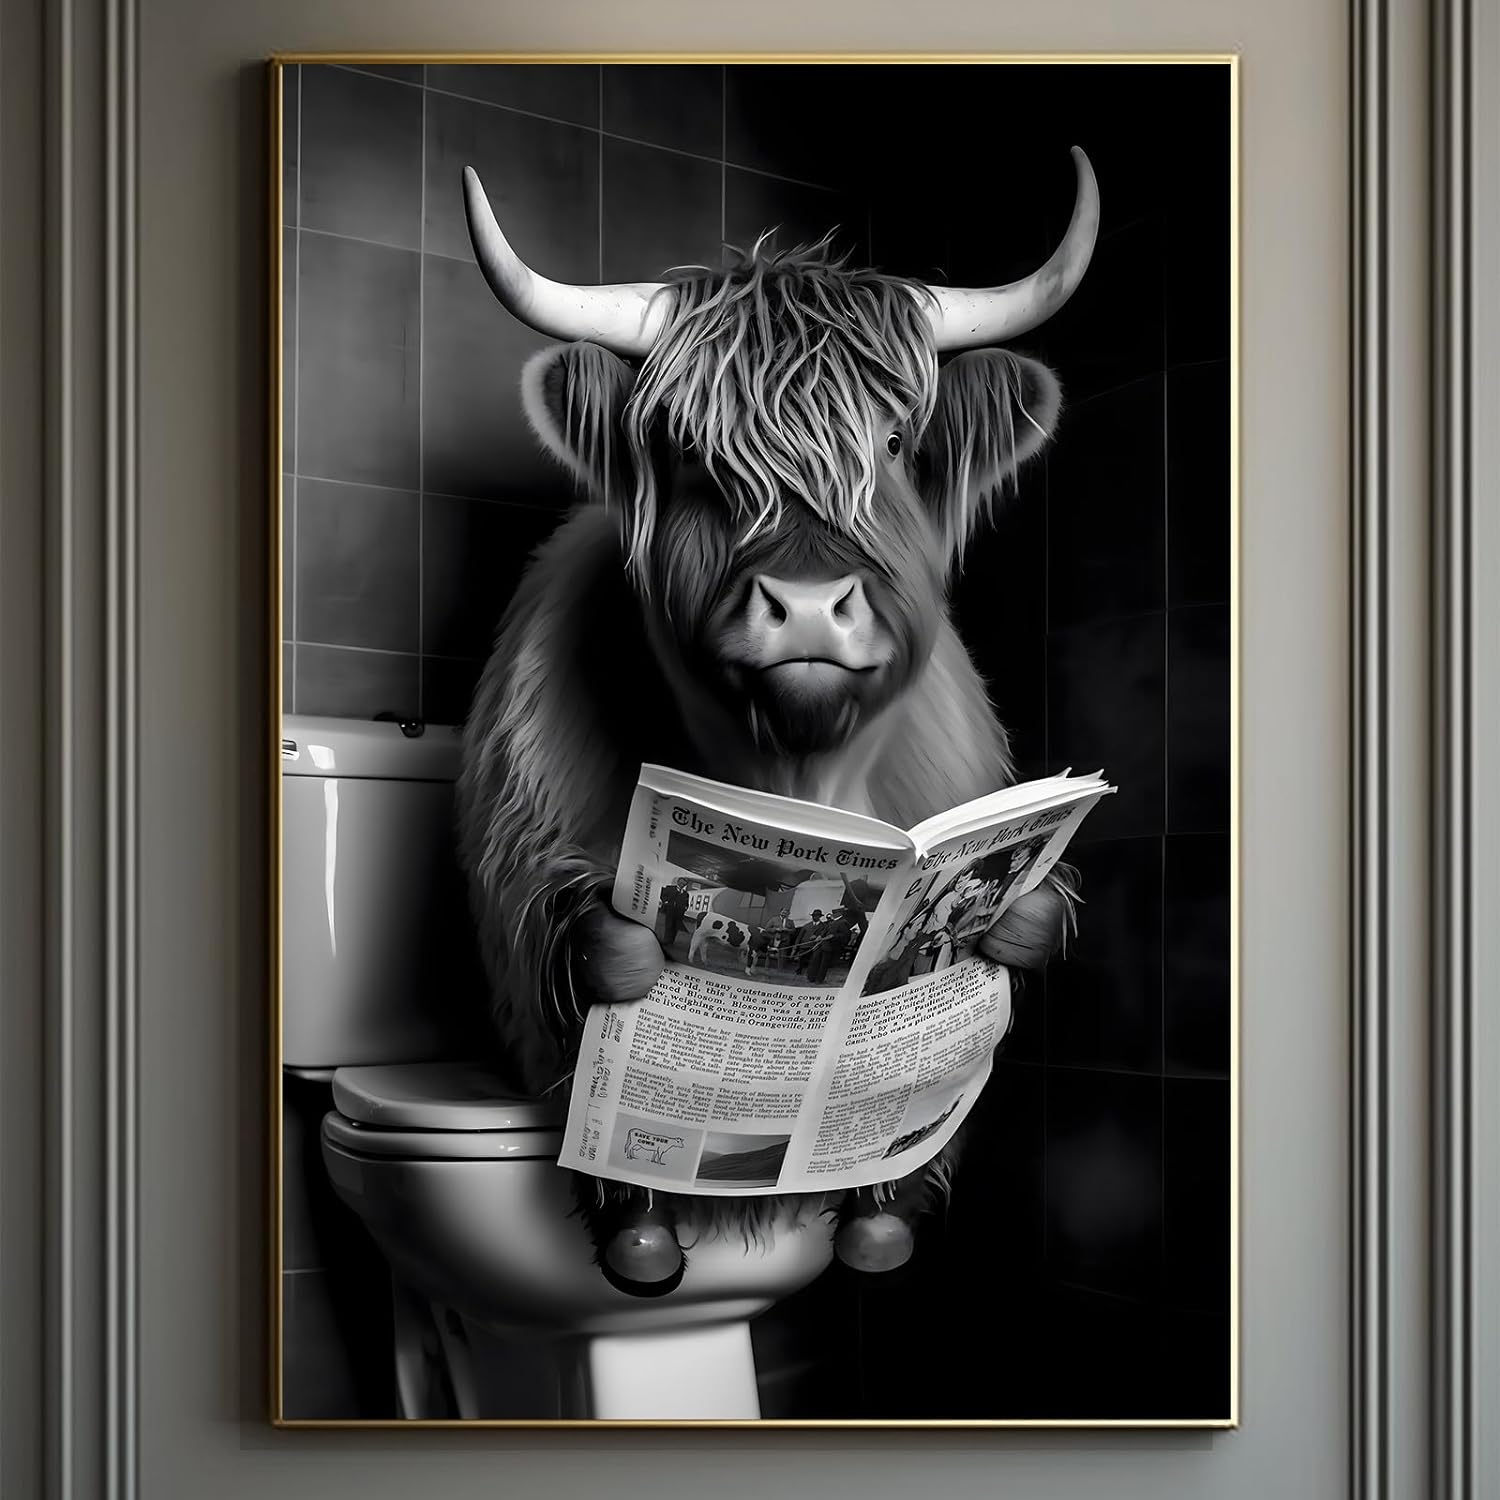 Whimsical Toilet Entertainment: Funny Highland Cow Wall Poster